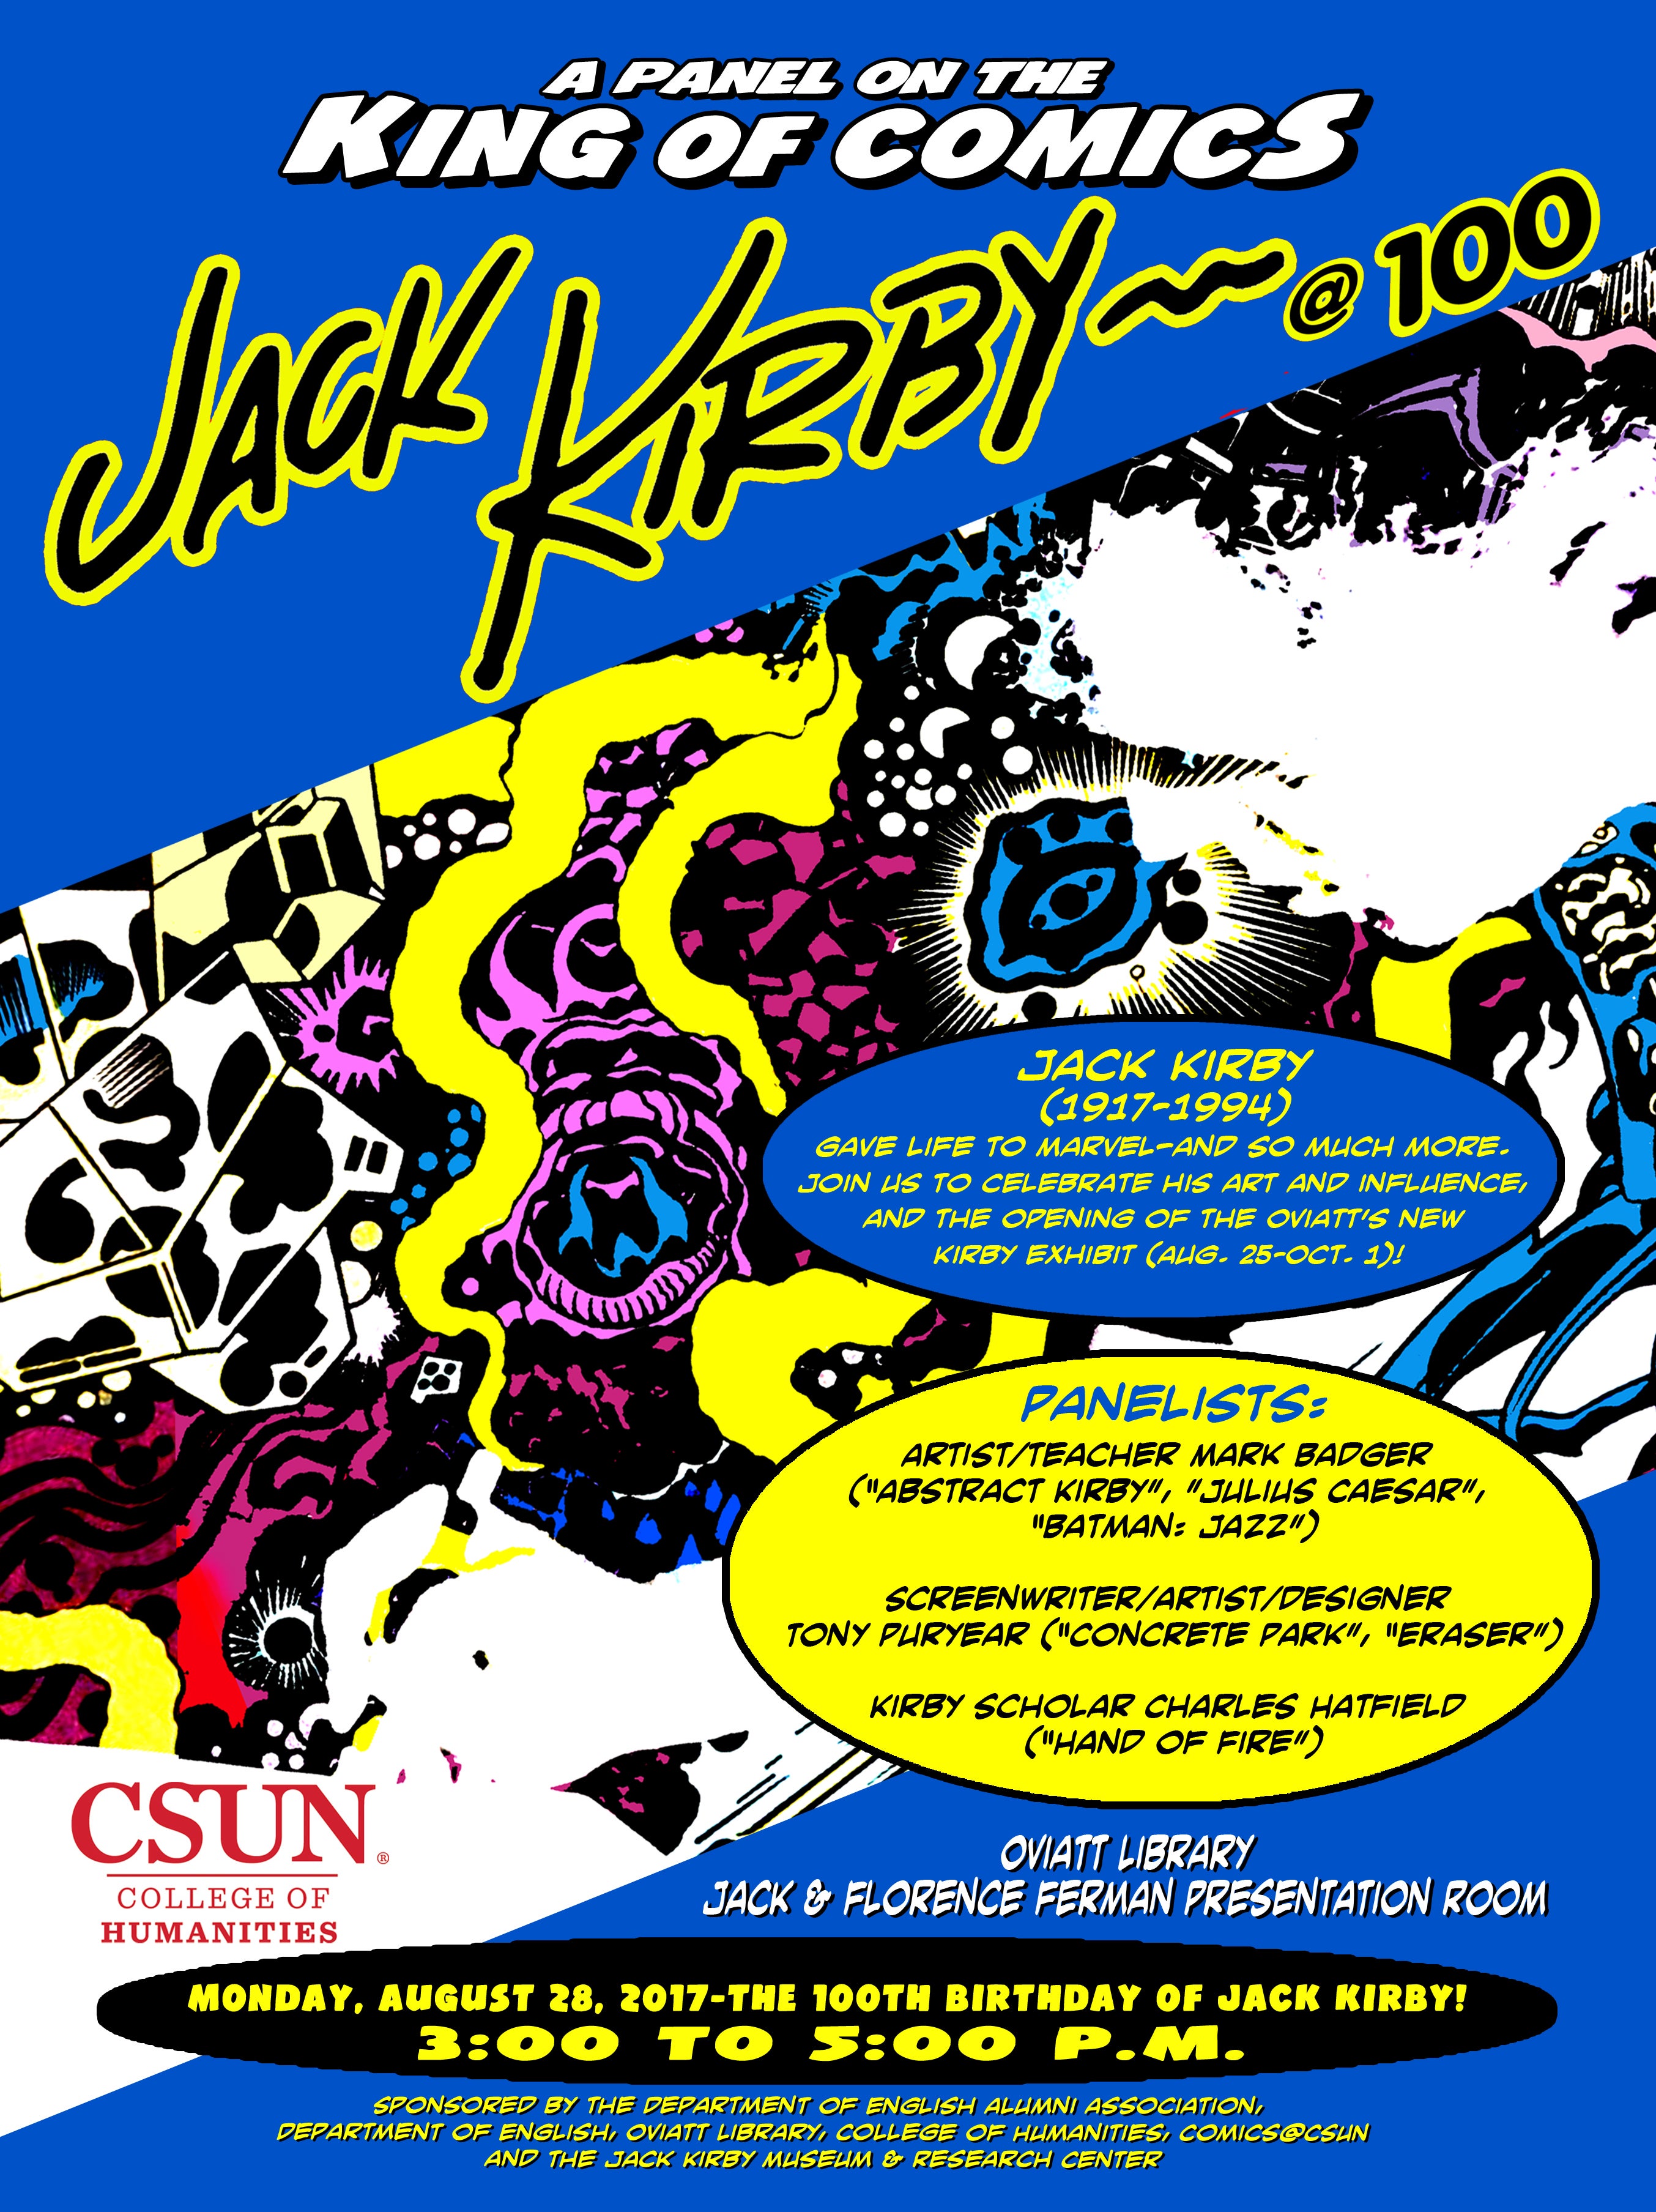 Jack Kirby at 100, panel discussion